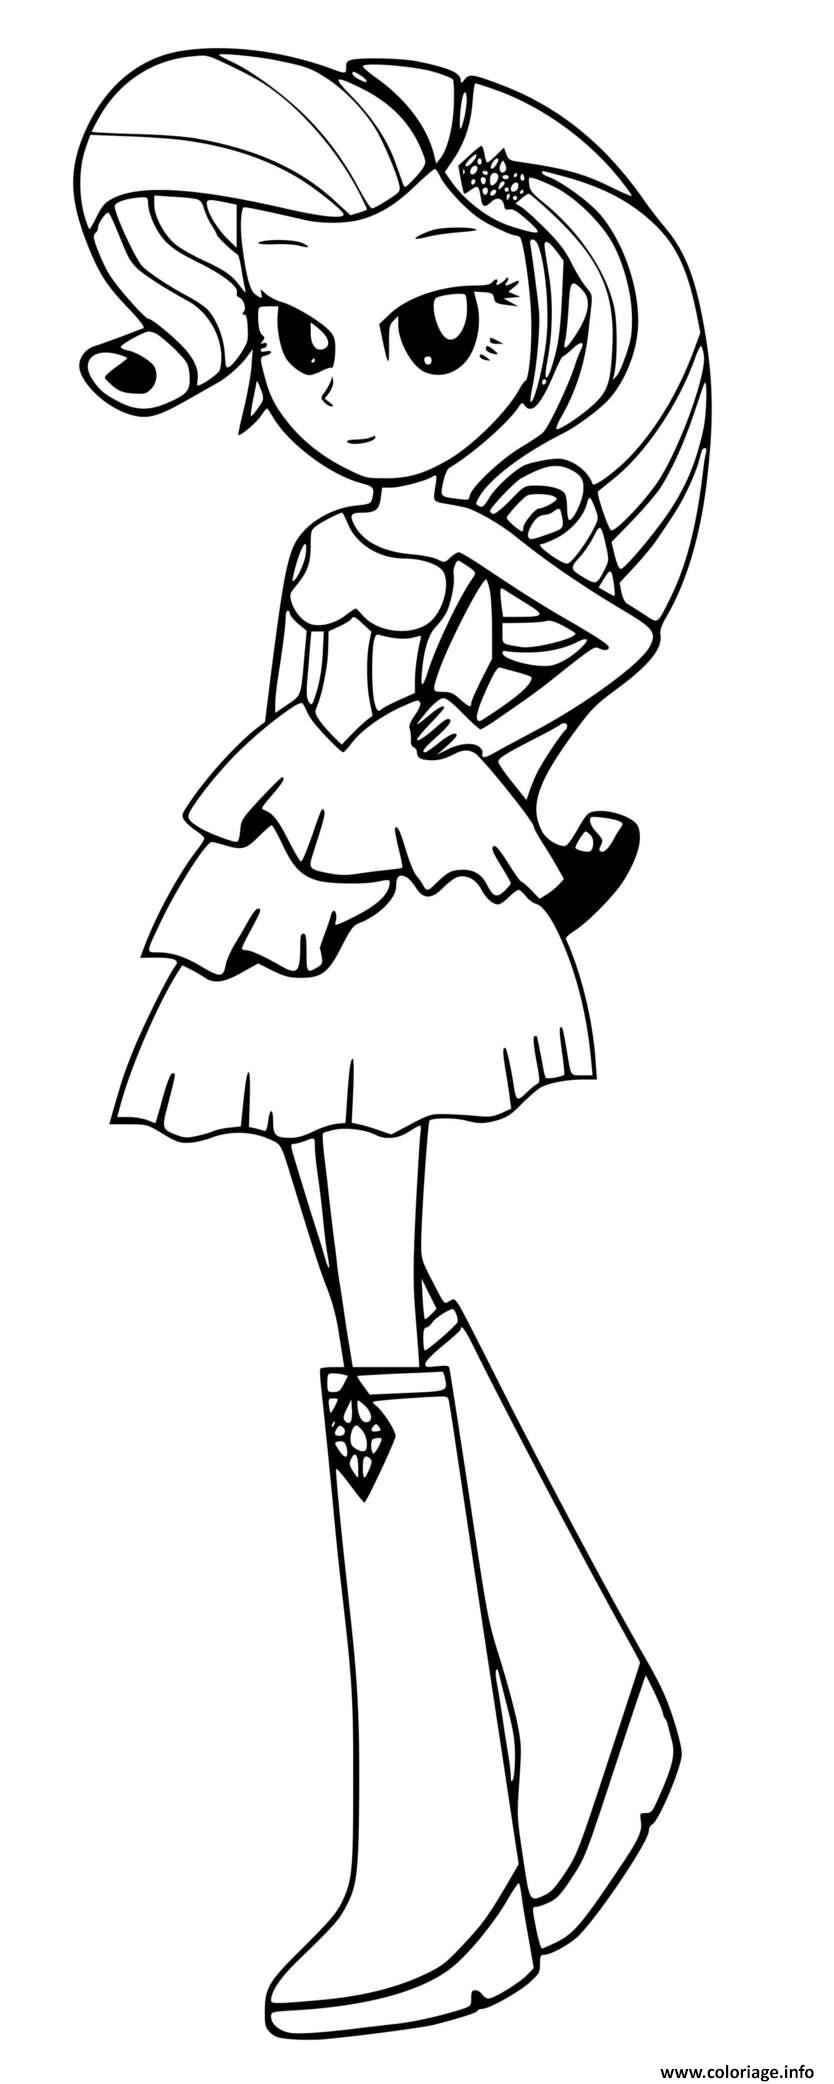 Coloriage My Little Pony Equestria Girls Rarity Dessin Equestria Girls dedans My Little Pony Coloriage